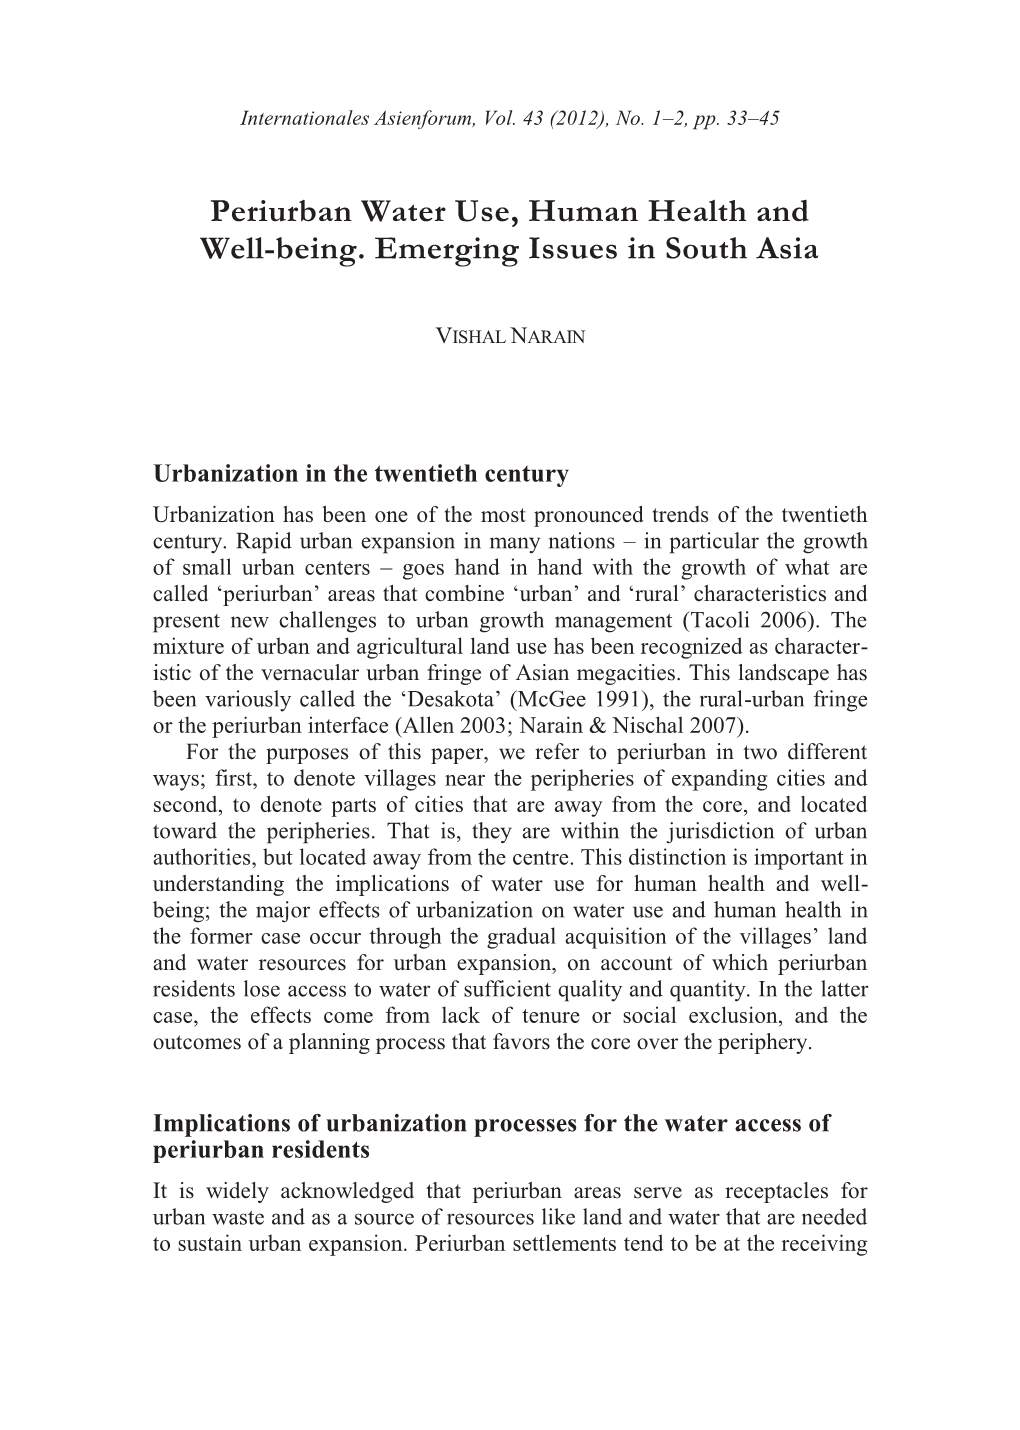 Periurban Water Use, Human Health and Well-Being. Emerging Issues in South Asia